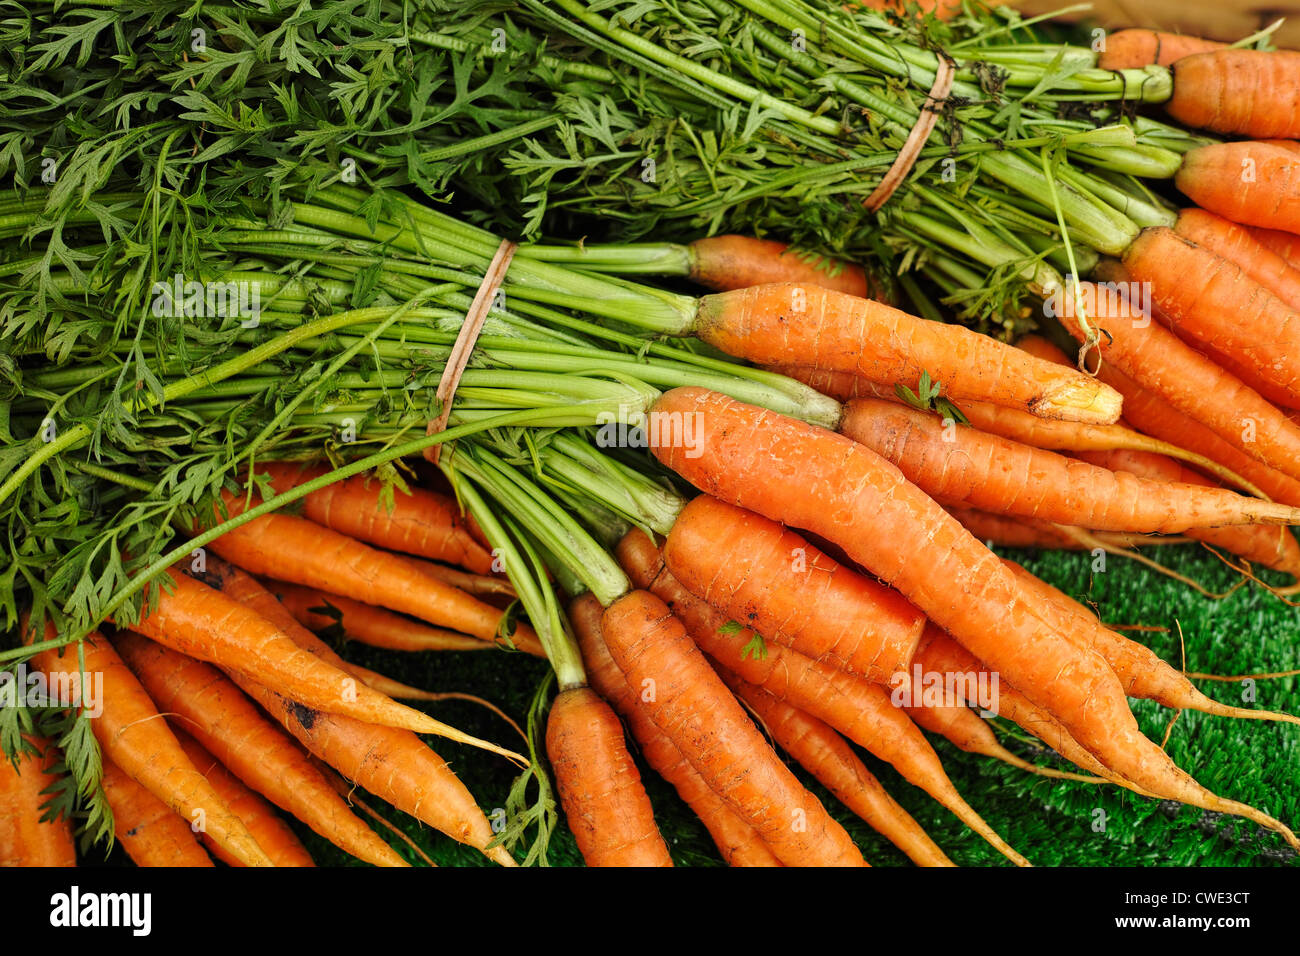 Gresh bunches of carronts Stock Photo